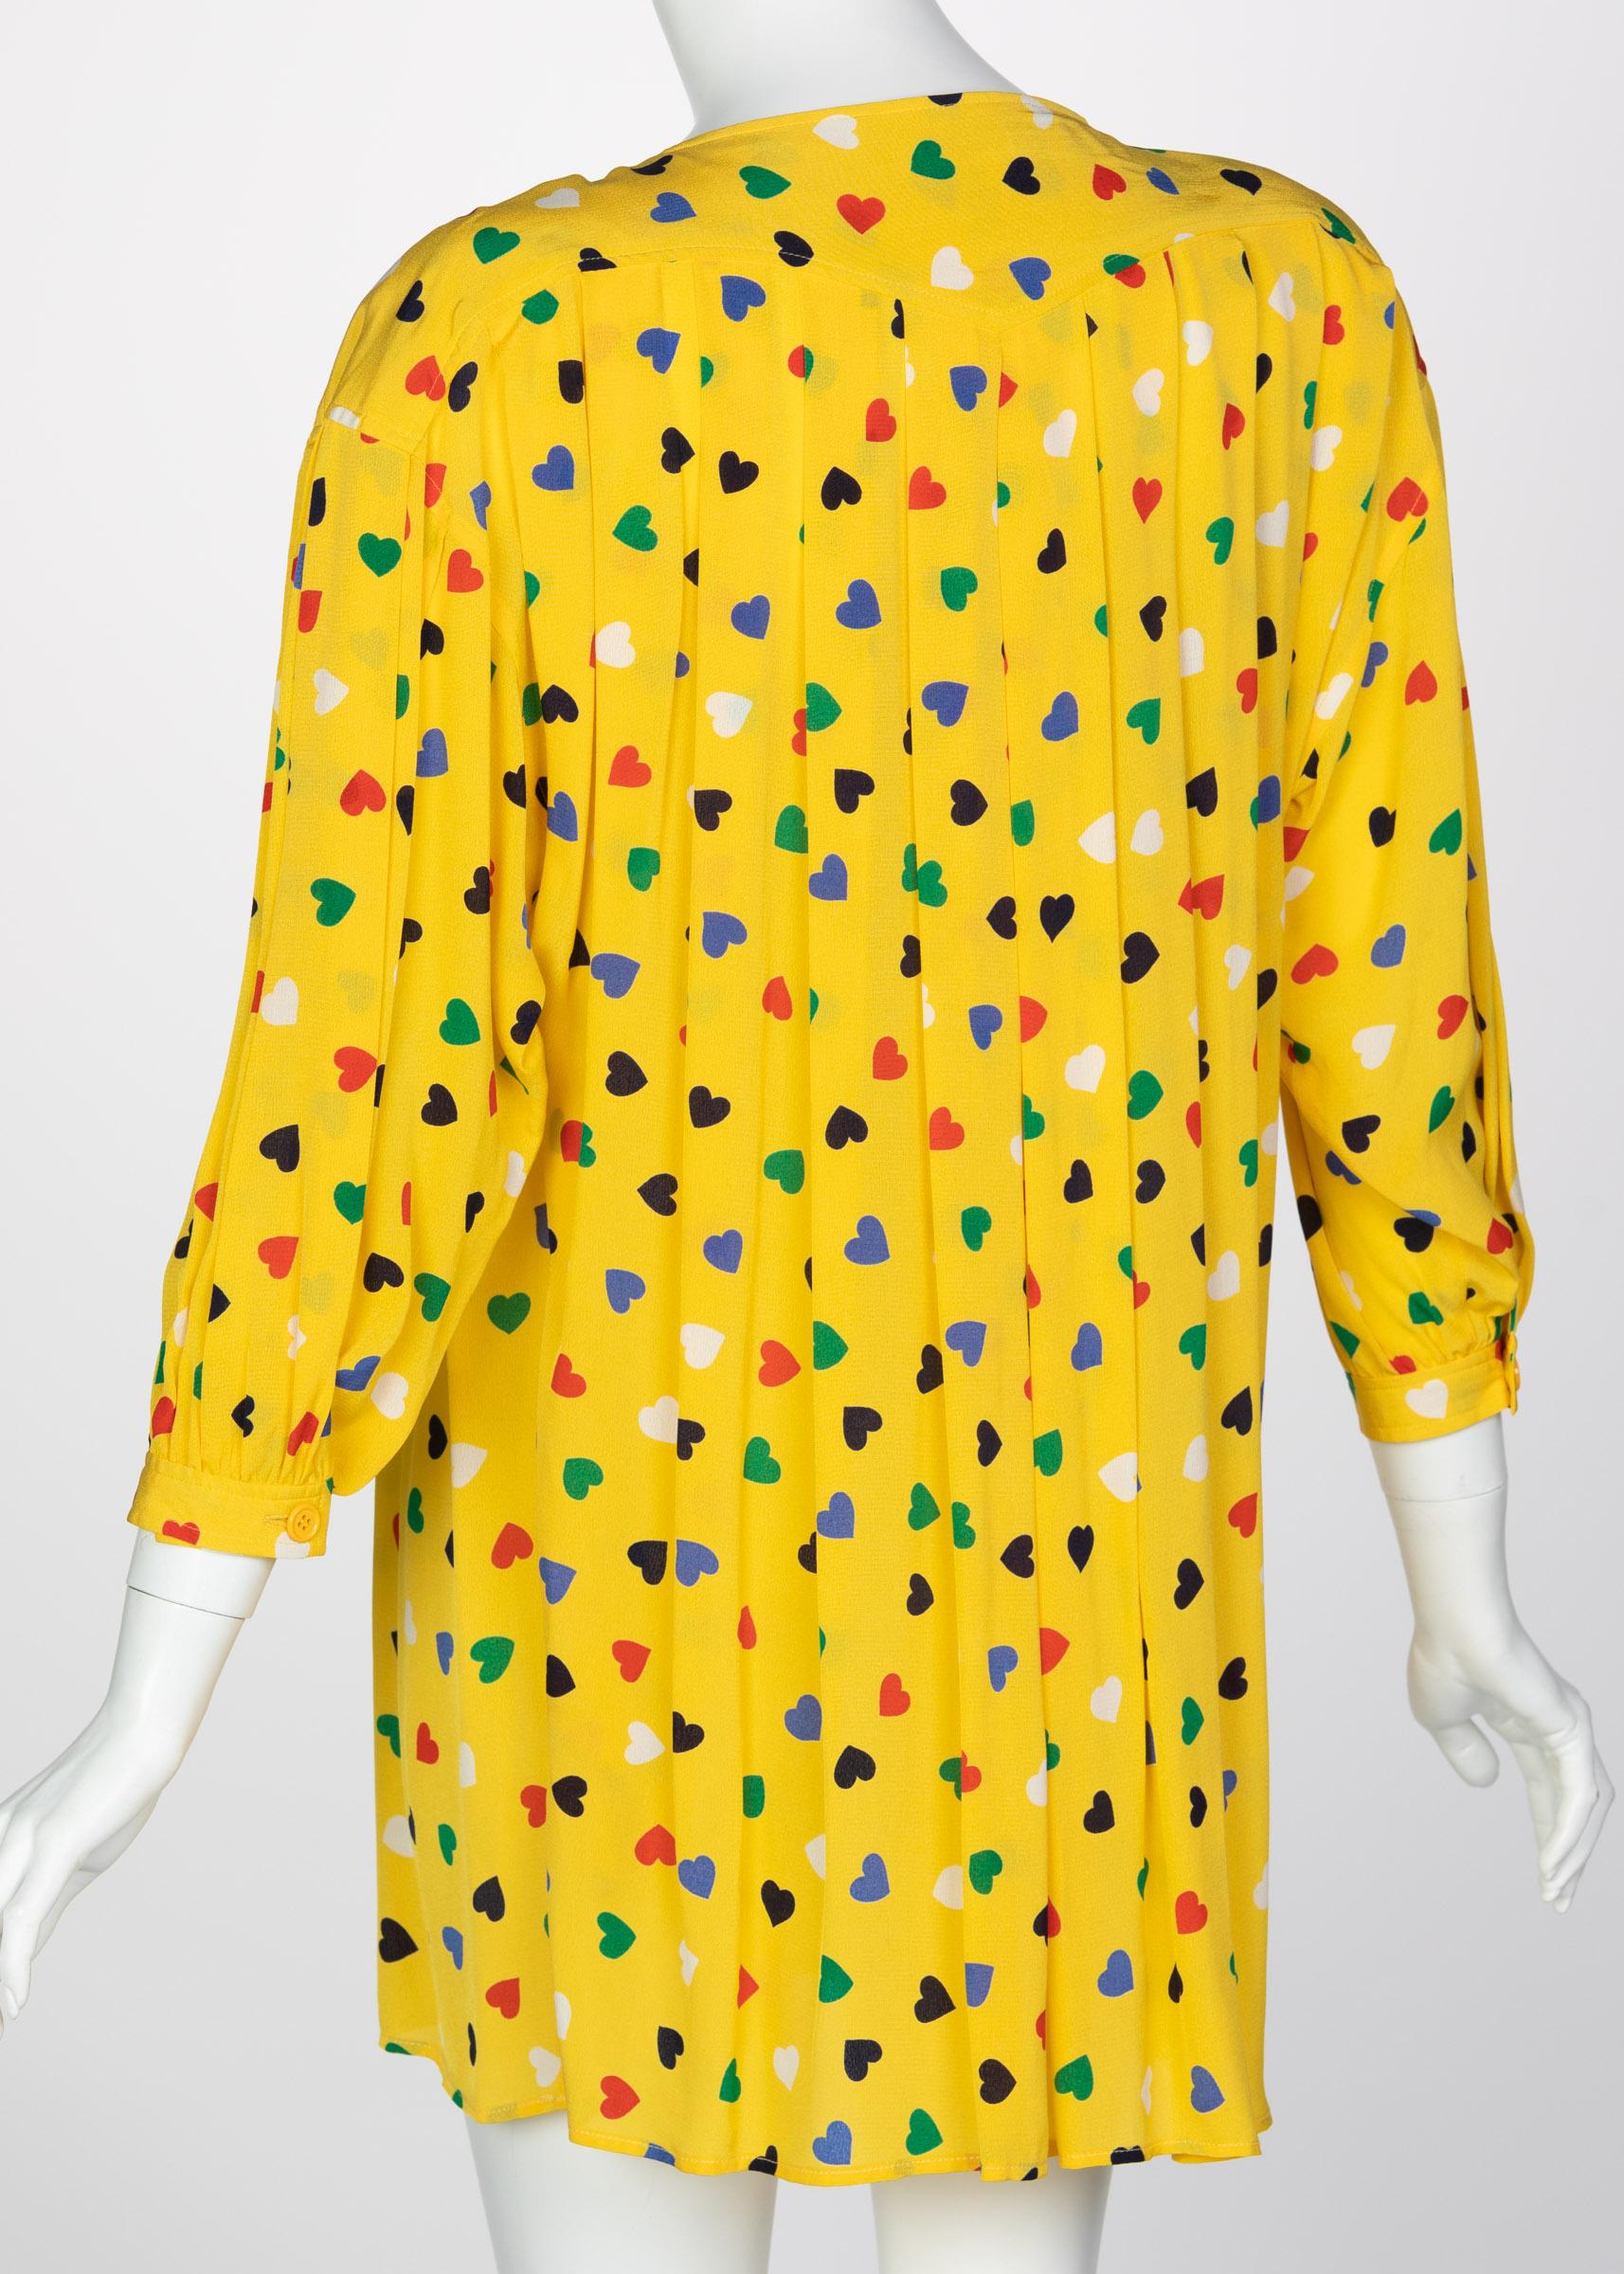 Vintage Ungaro Yellow heart print Tunic Blouse In Excellent Condition For Sale In Boca Raton, FL